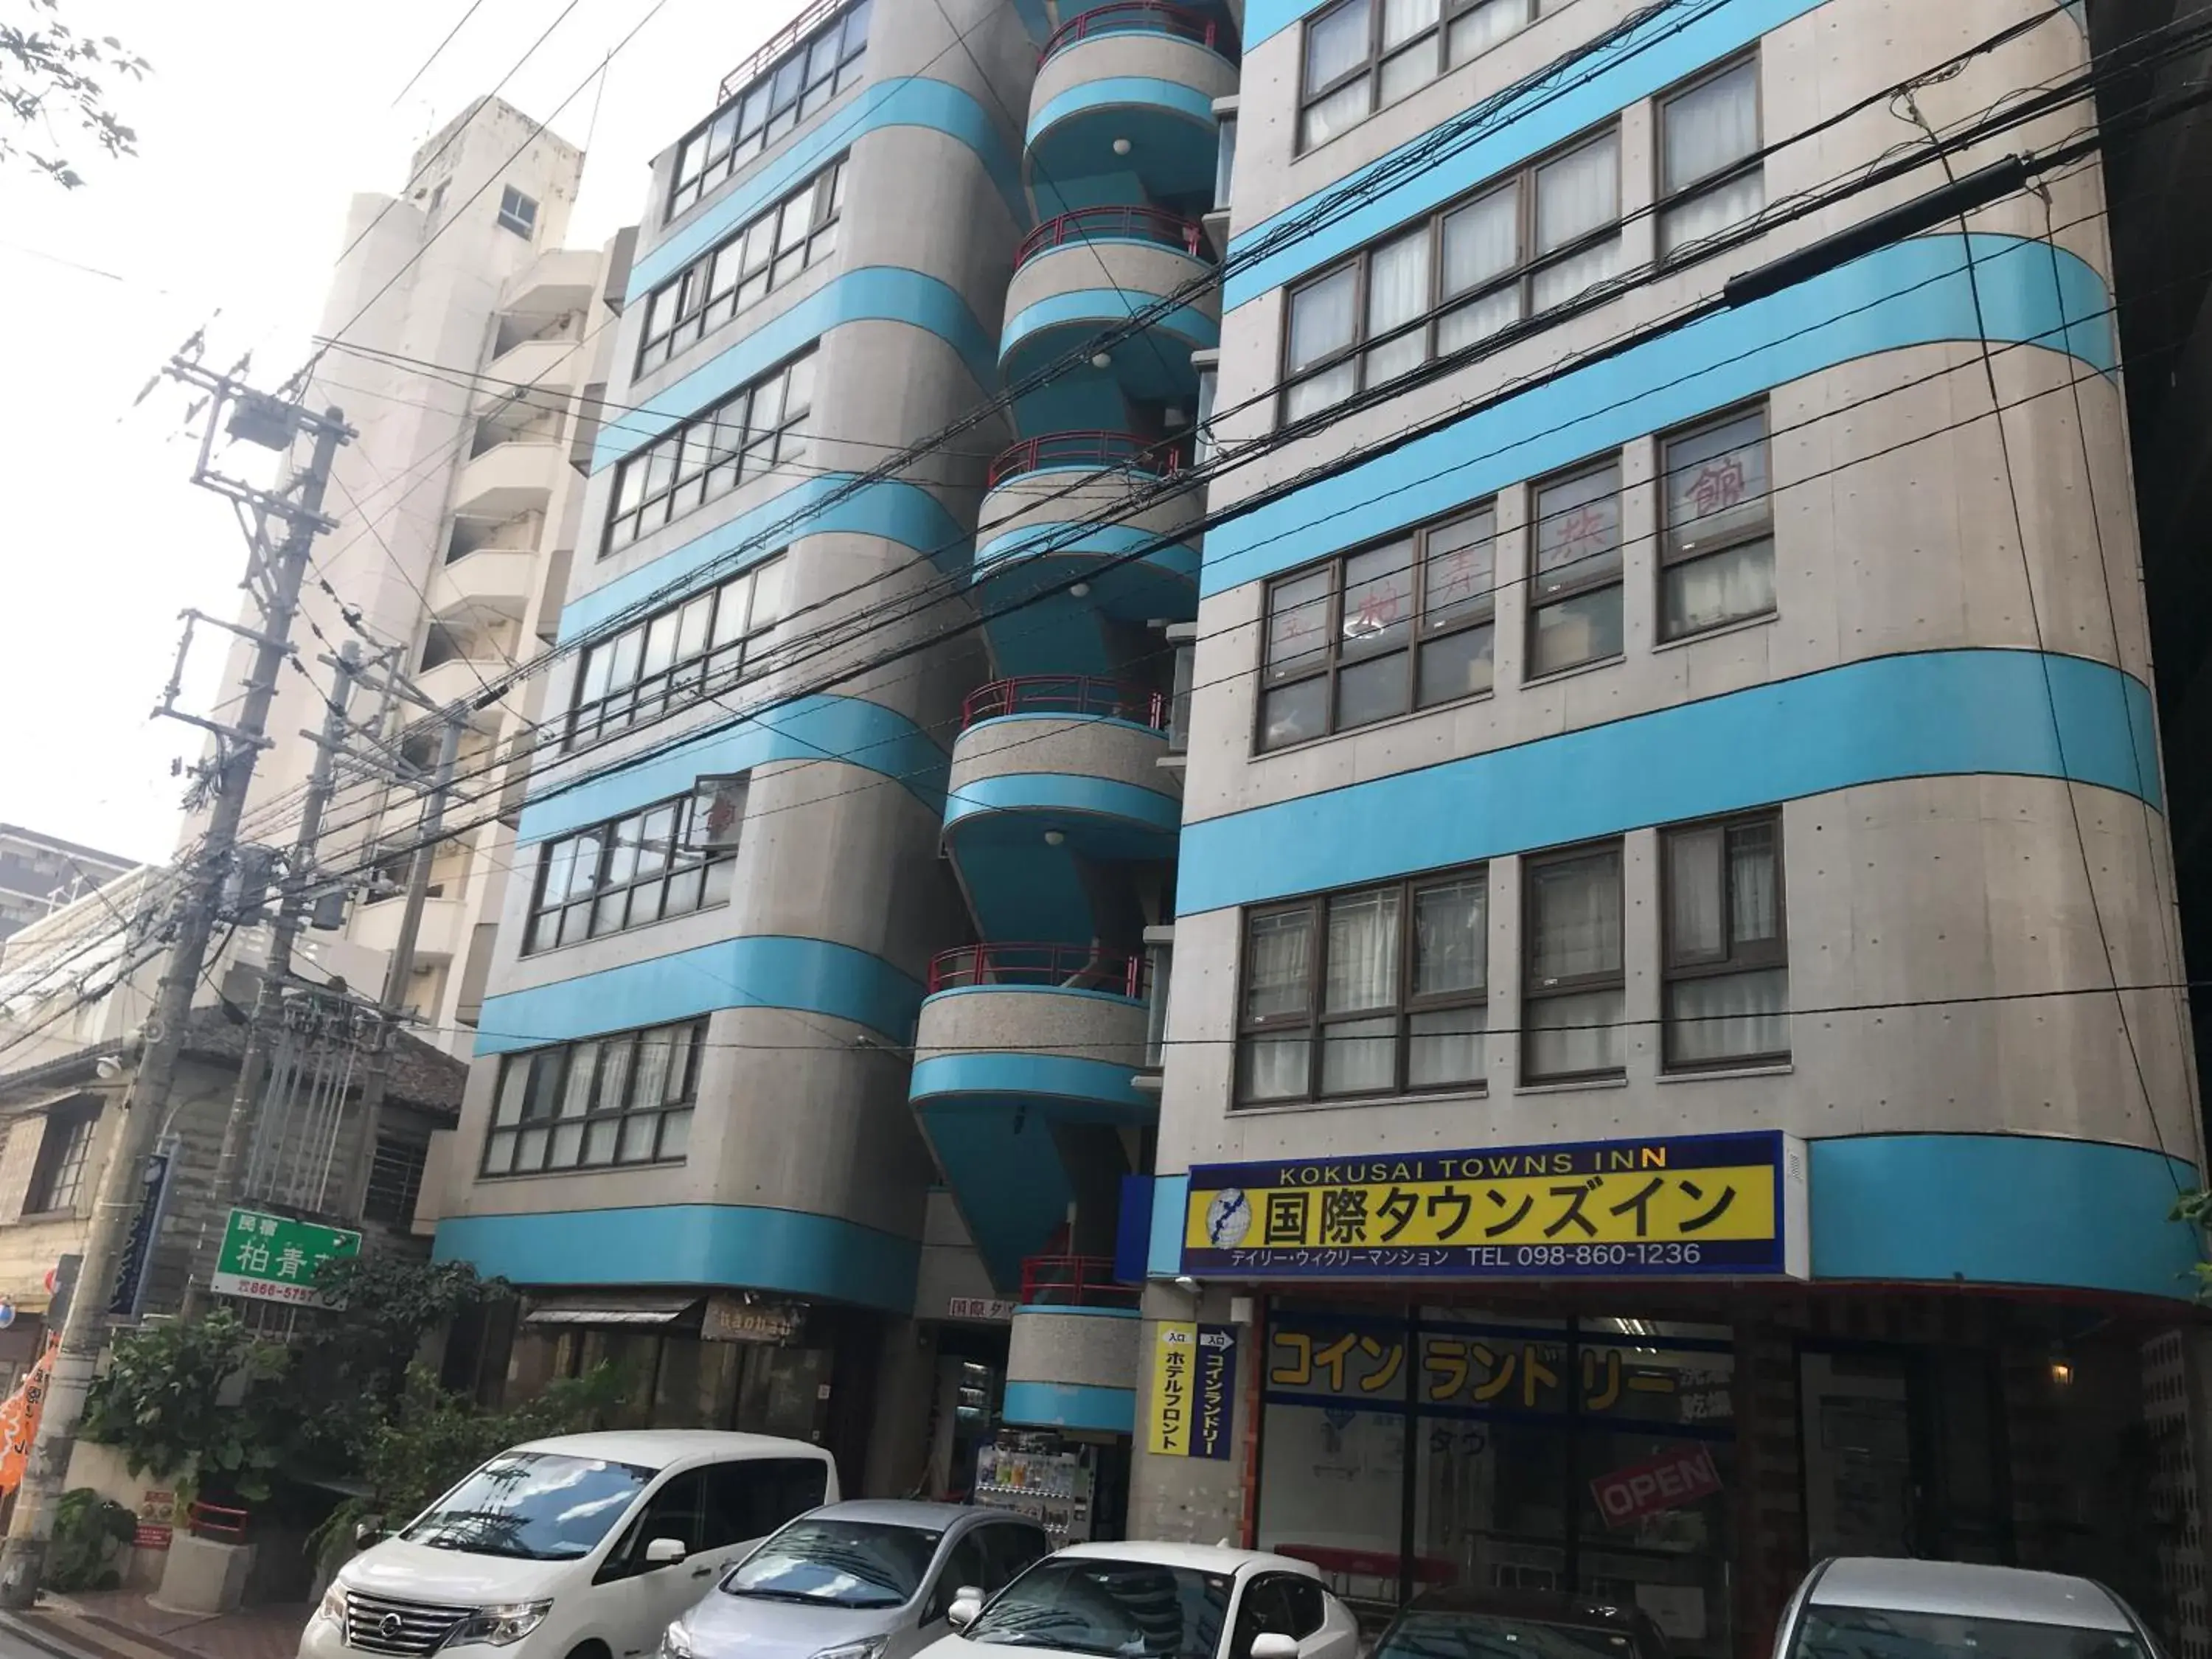 Property Building in Kokusai Towns Inn